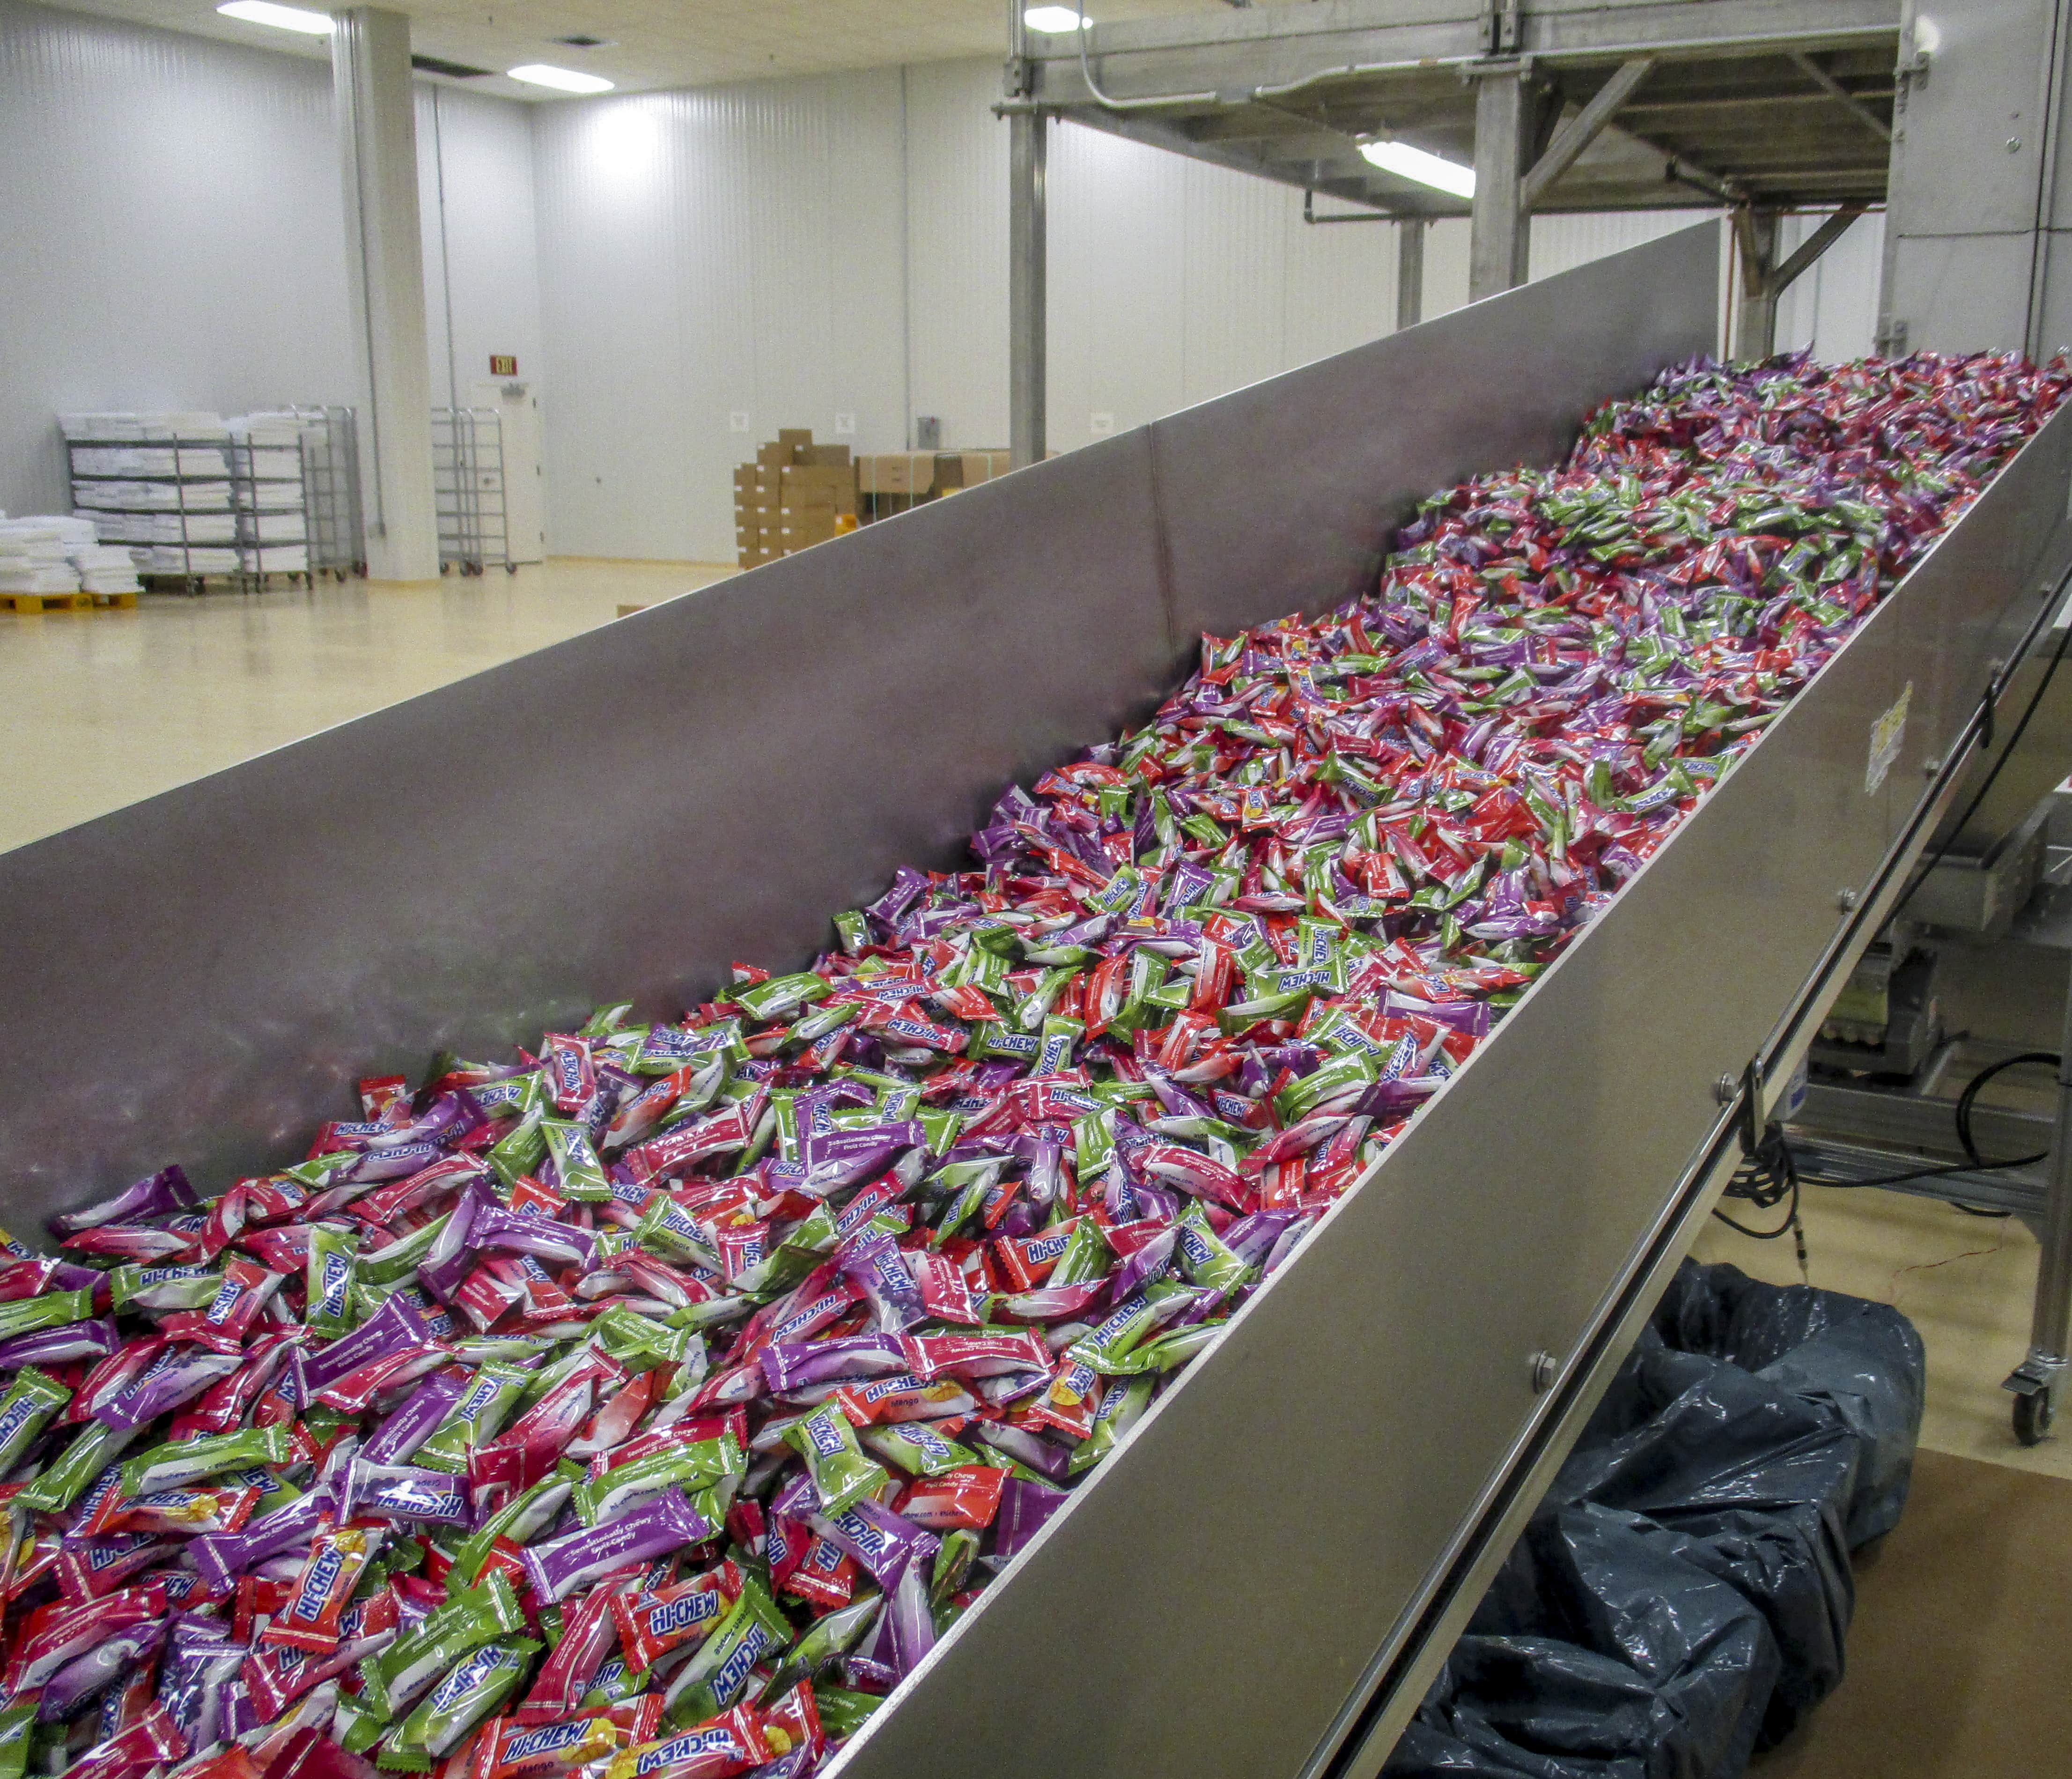 Japanese Candy Maker Finds Sweet Spot in North Carolina